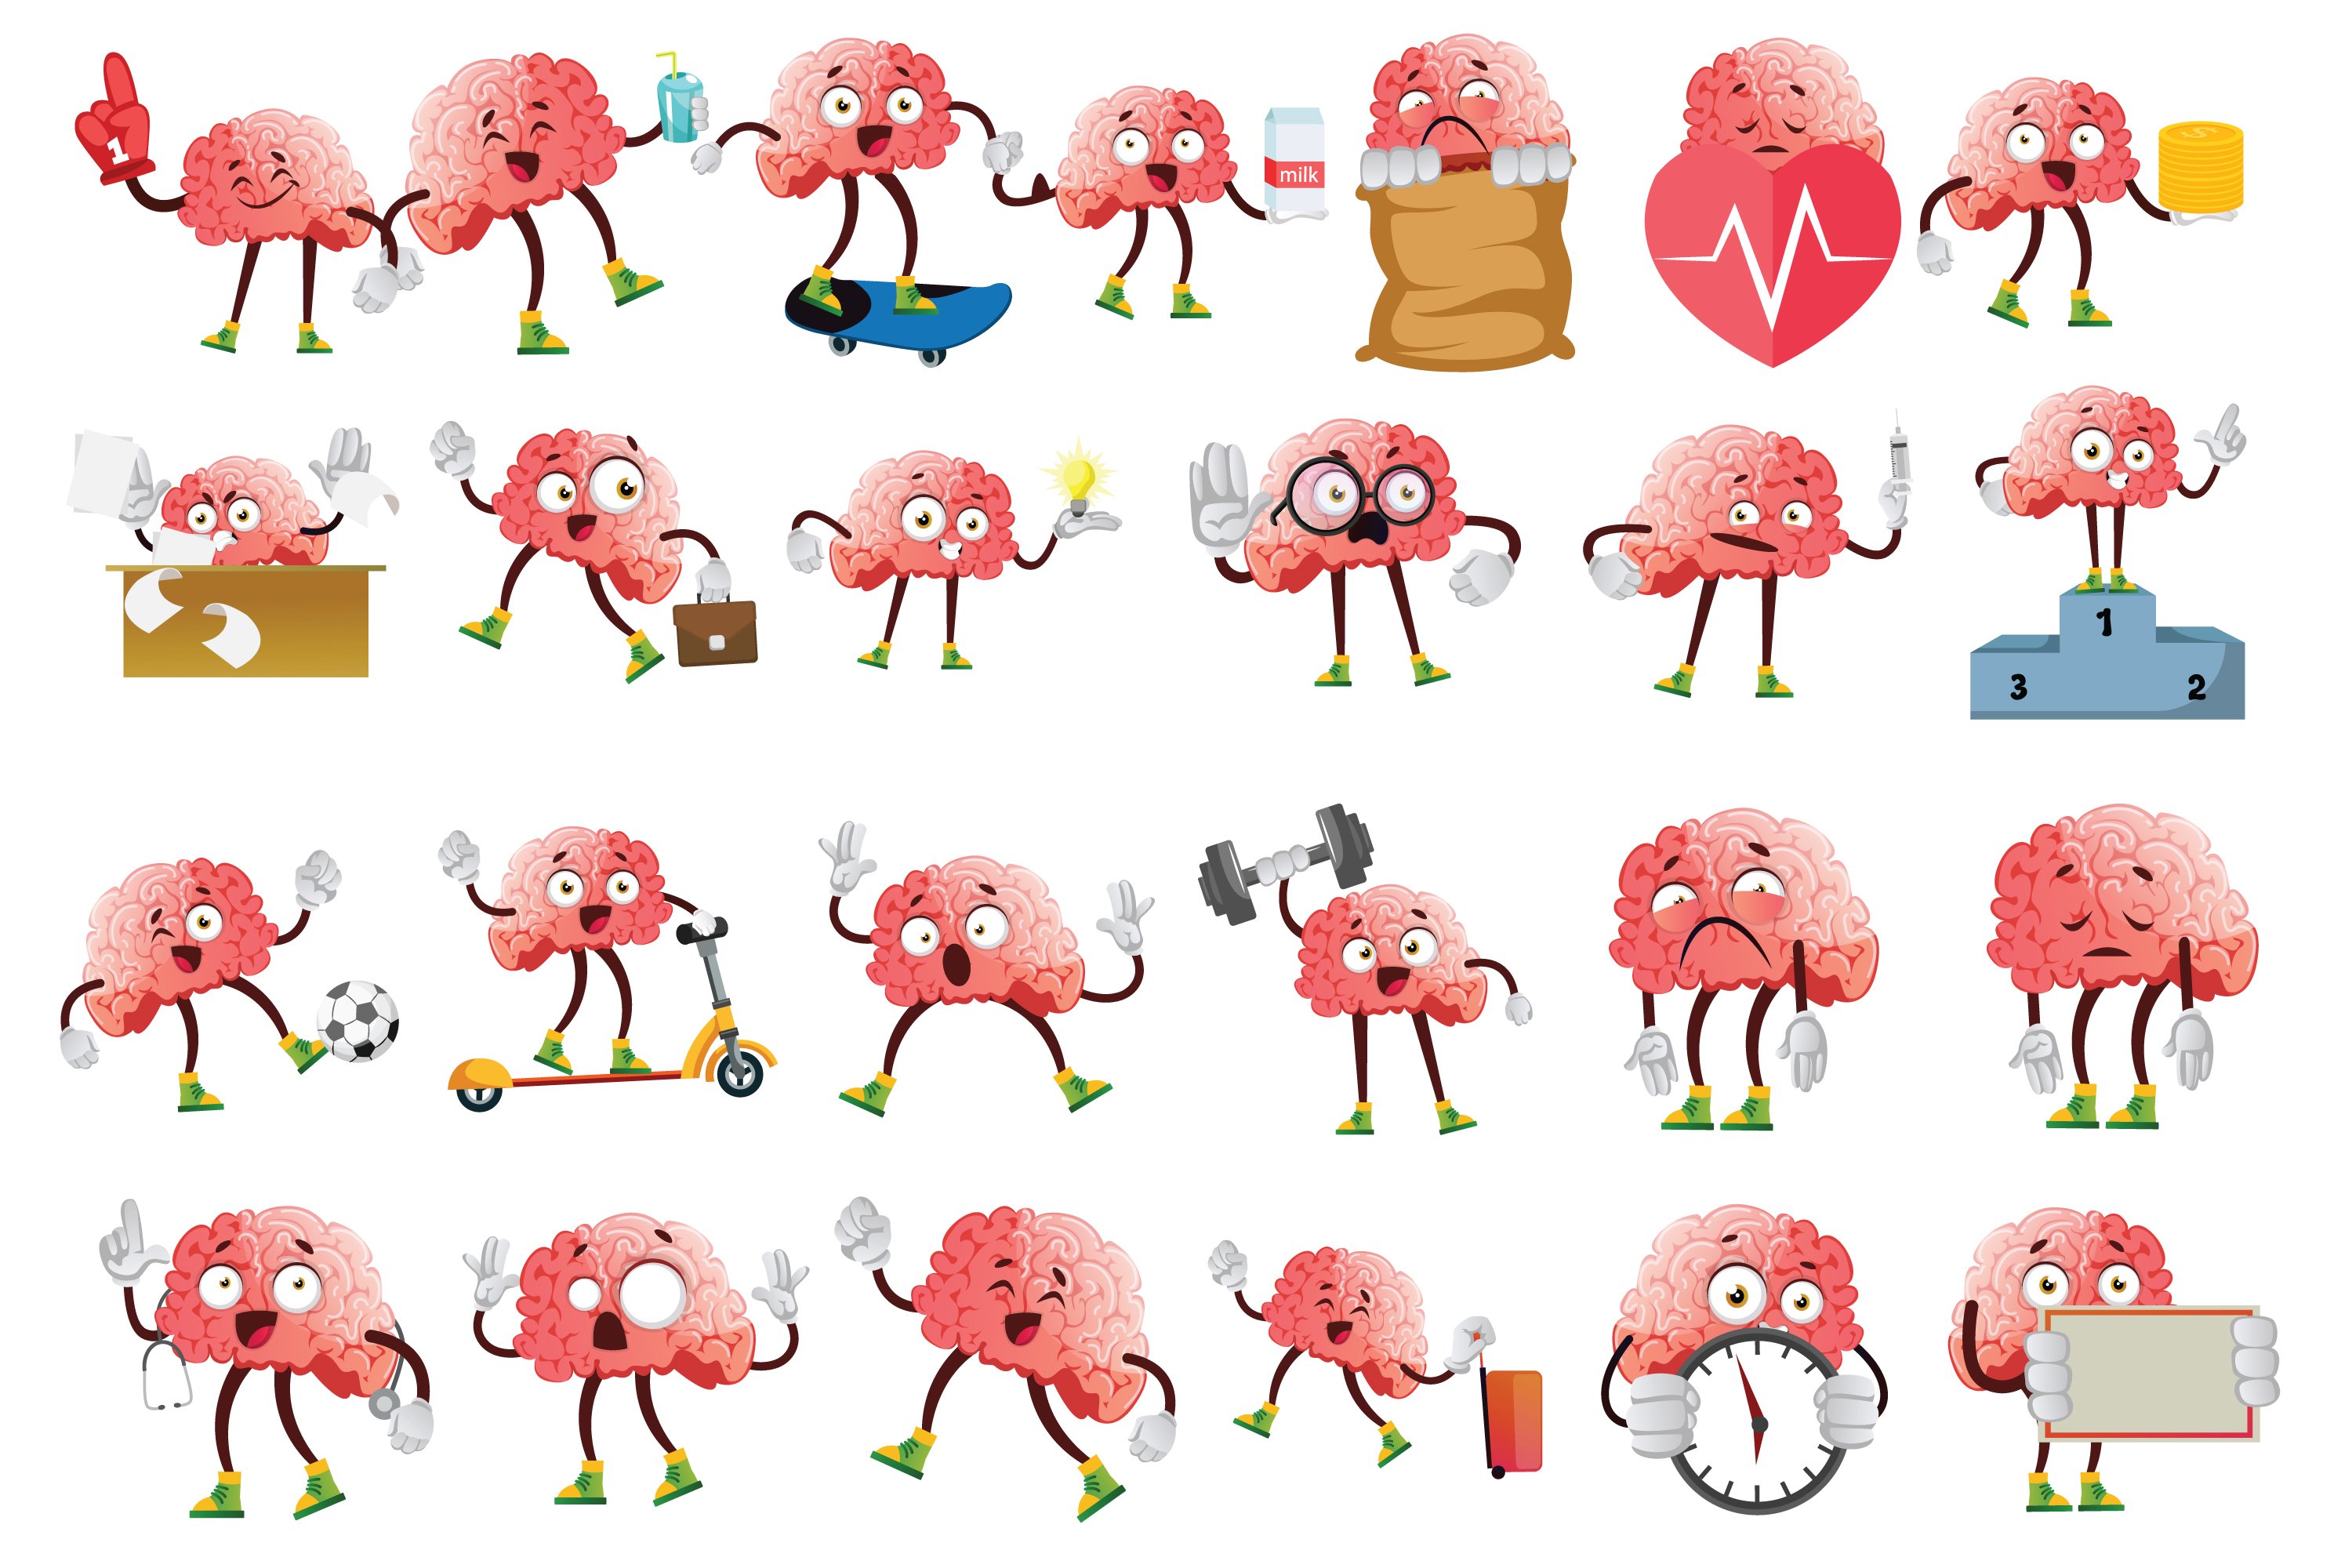 Various variants of brain images.